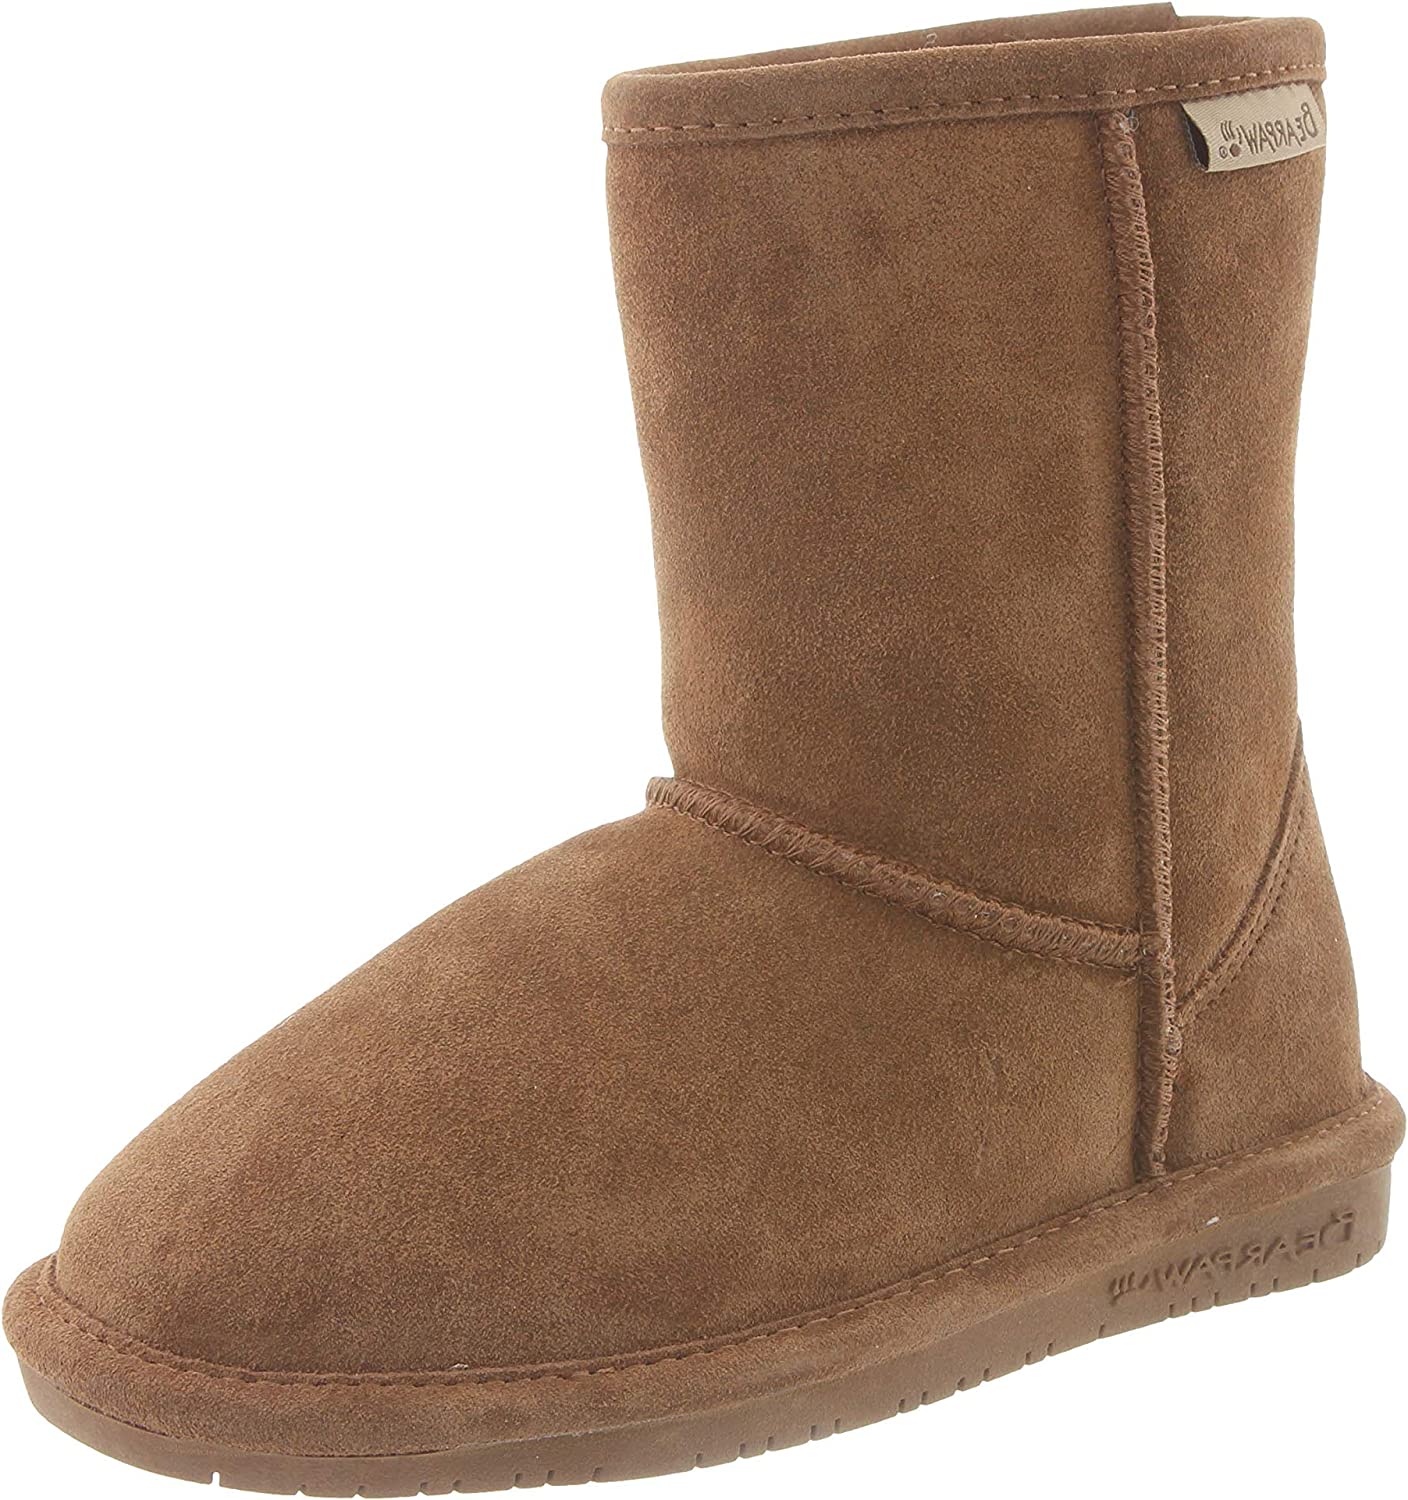 BEARPAW Girls Emma Short Suede Boots - Hickory - Y4